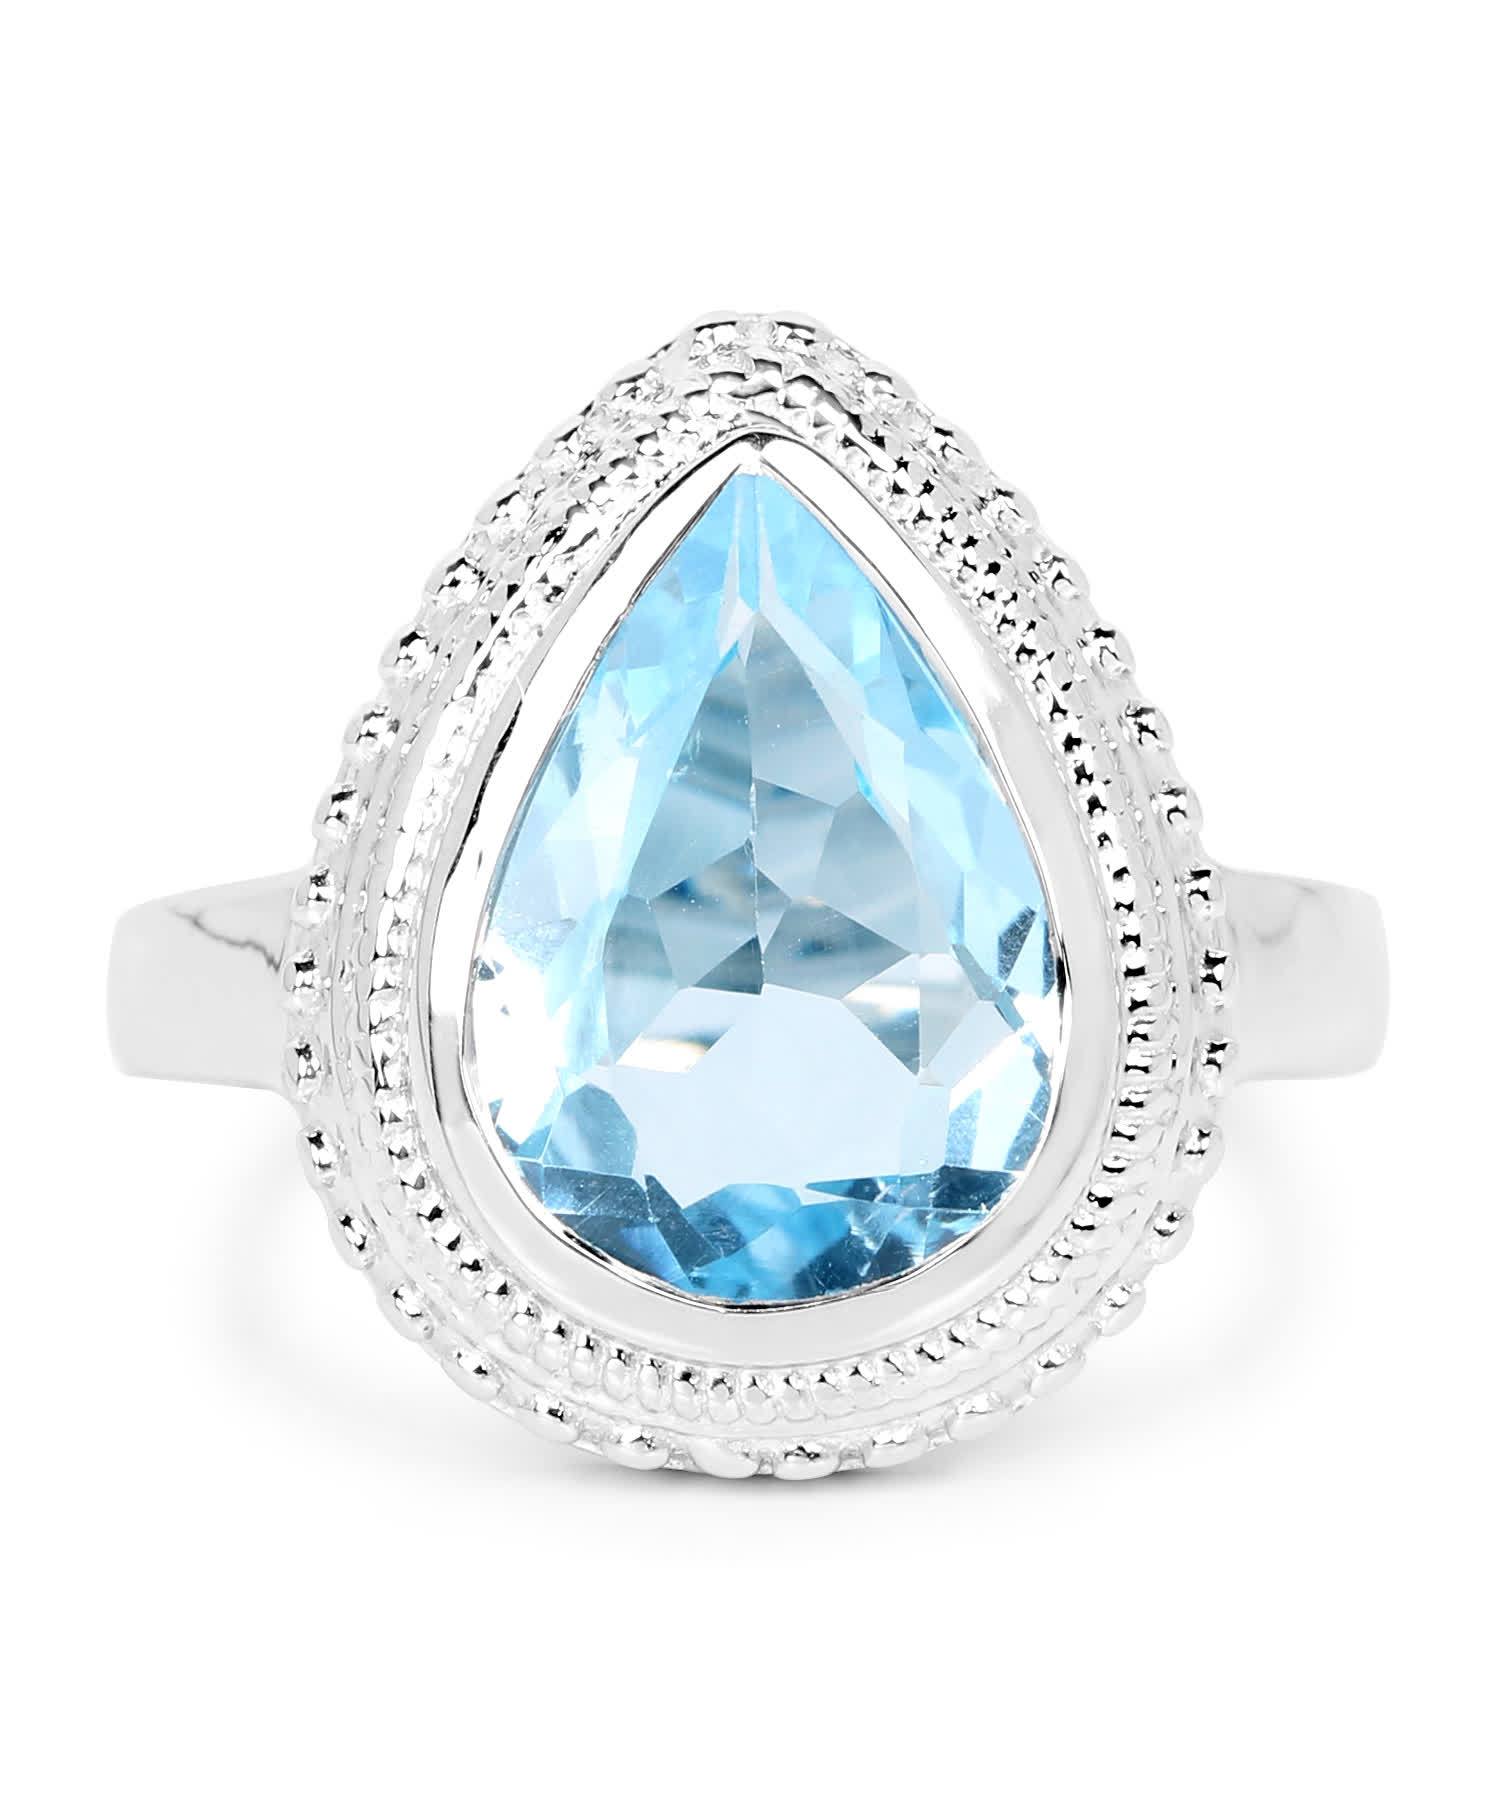 5.30ctw Natural Sky Blue Topaz Rhodium Plated 925 Sterling Silver Cocktail Ring View 3